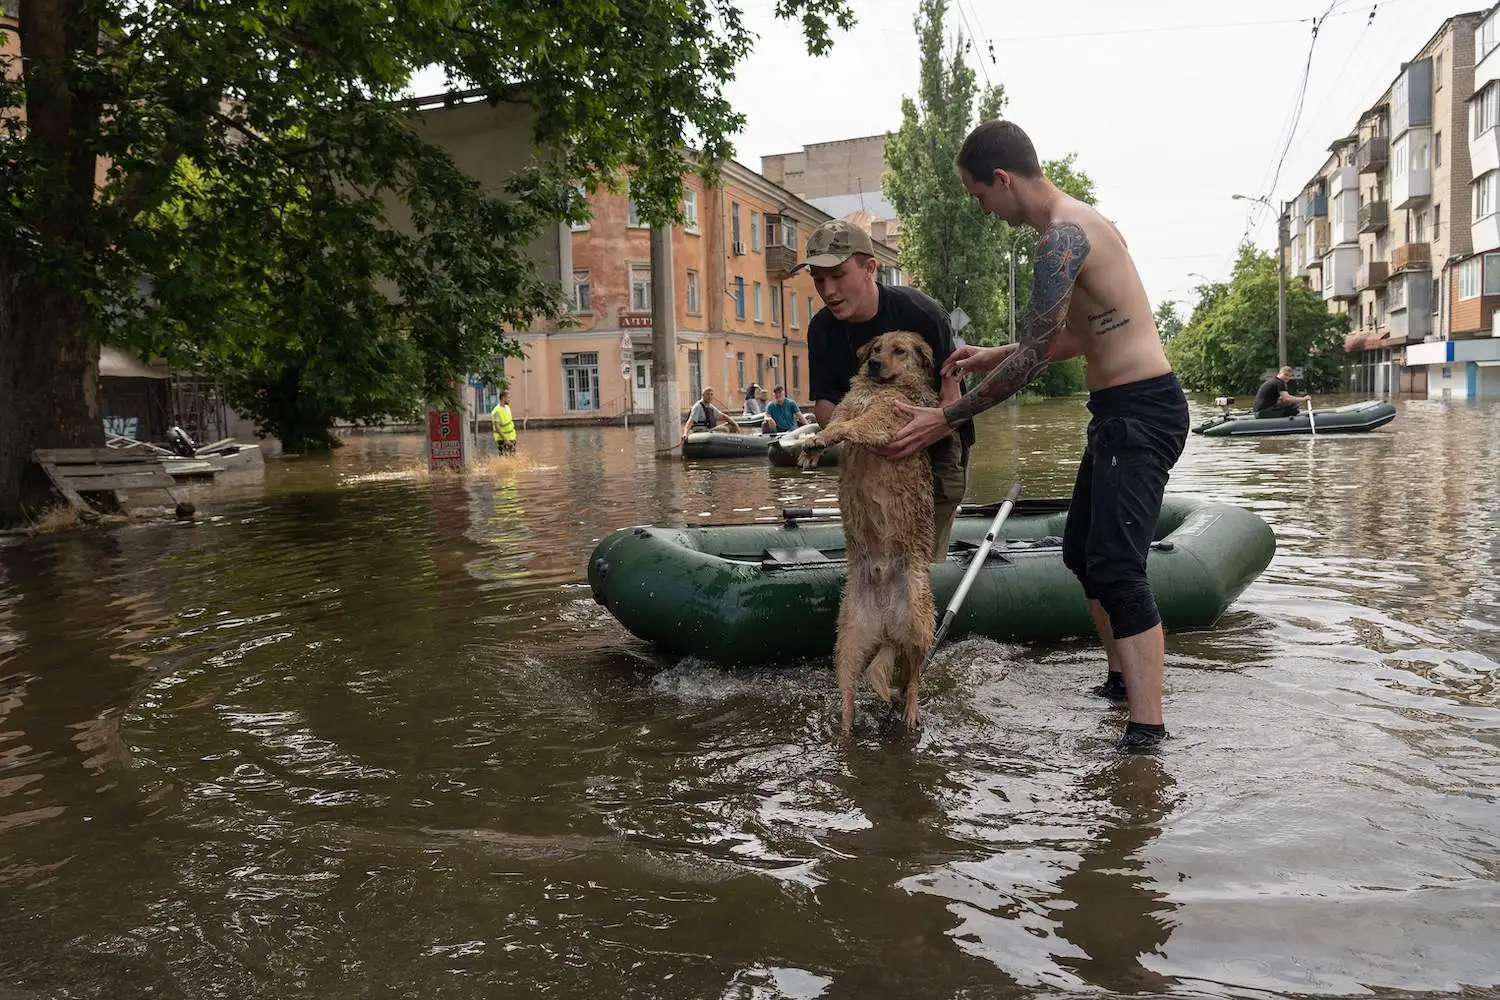 Local residents of Kherson evacuating a flooded area rescue a dog, after a dam exploded in Russian-controlled territory in Ukraine on June 7. Ukraine has blamed Russia for the dam’s rupture.